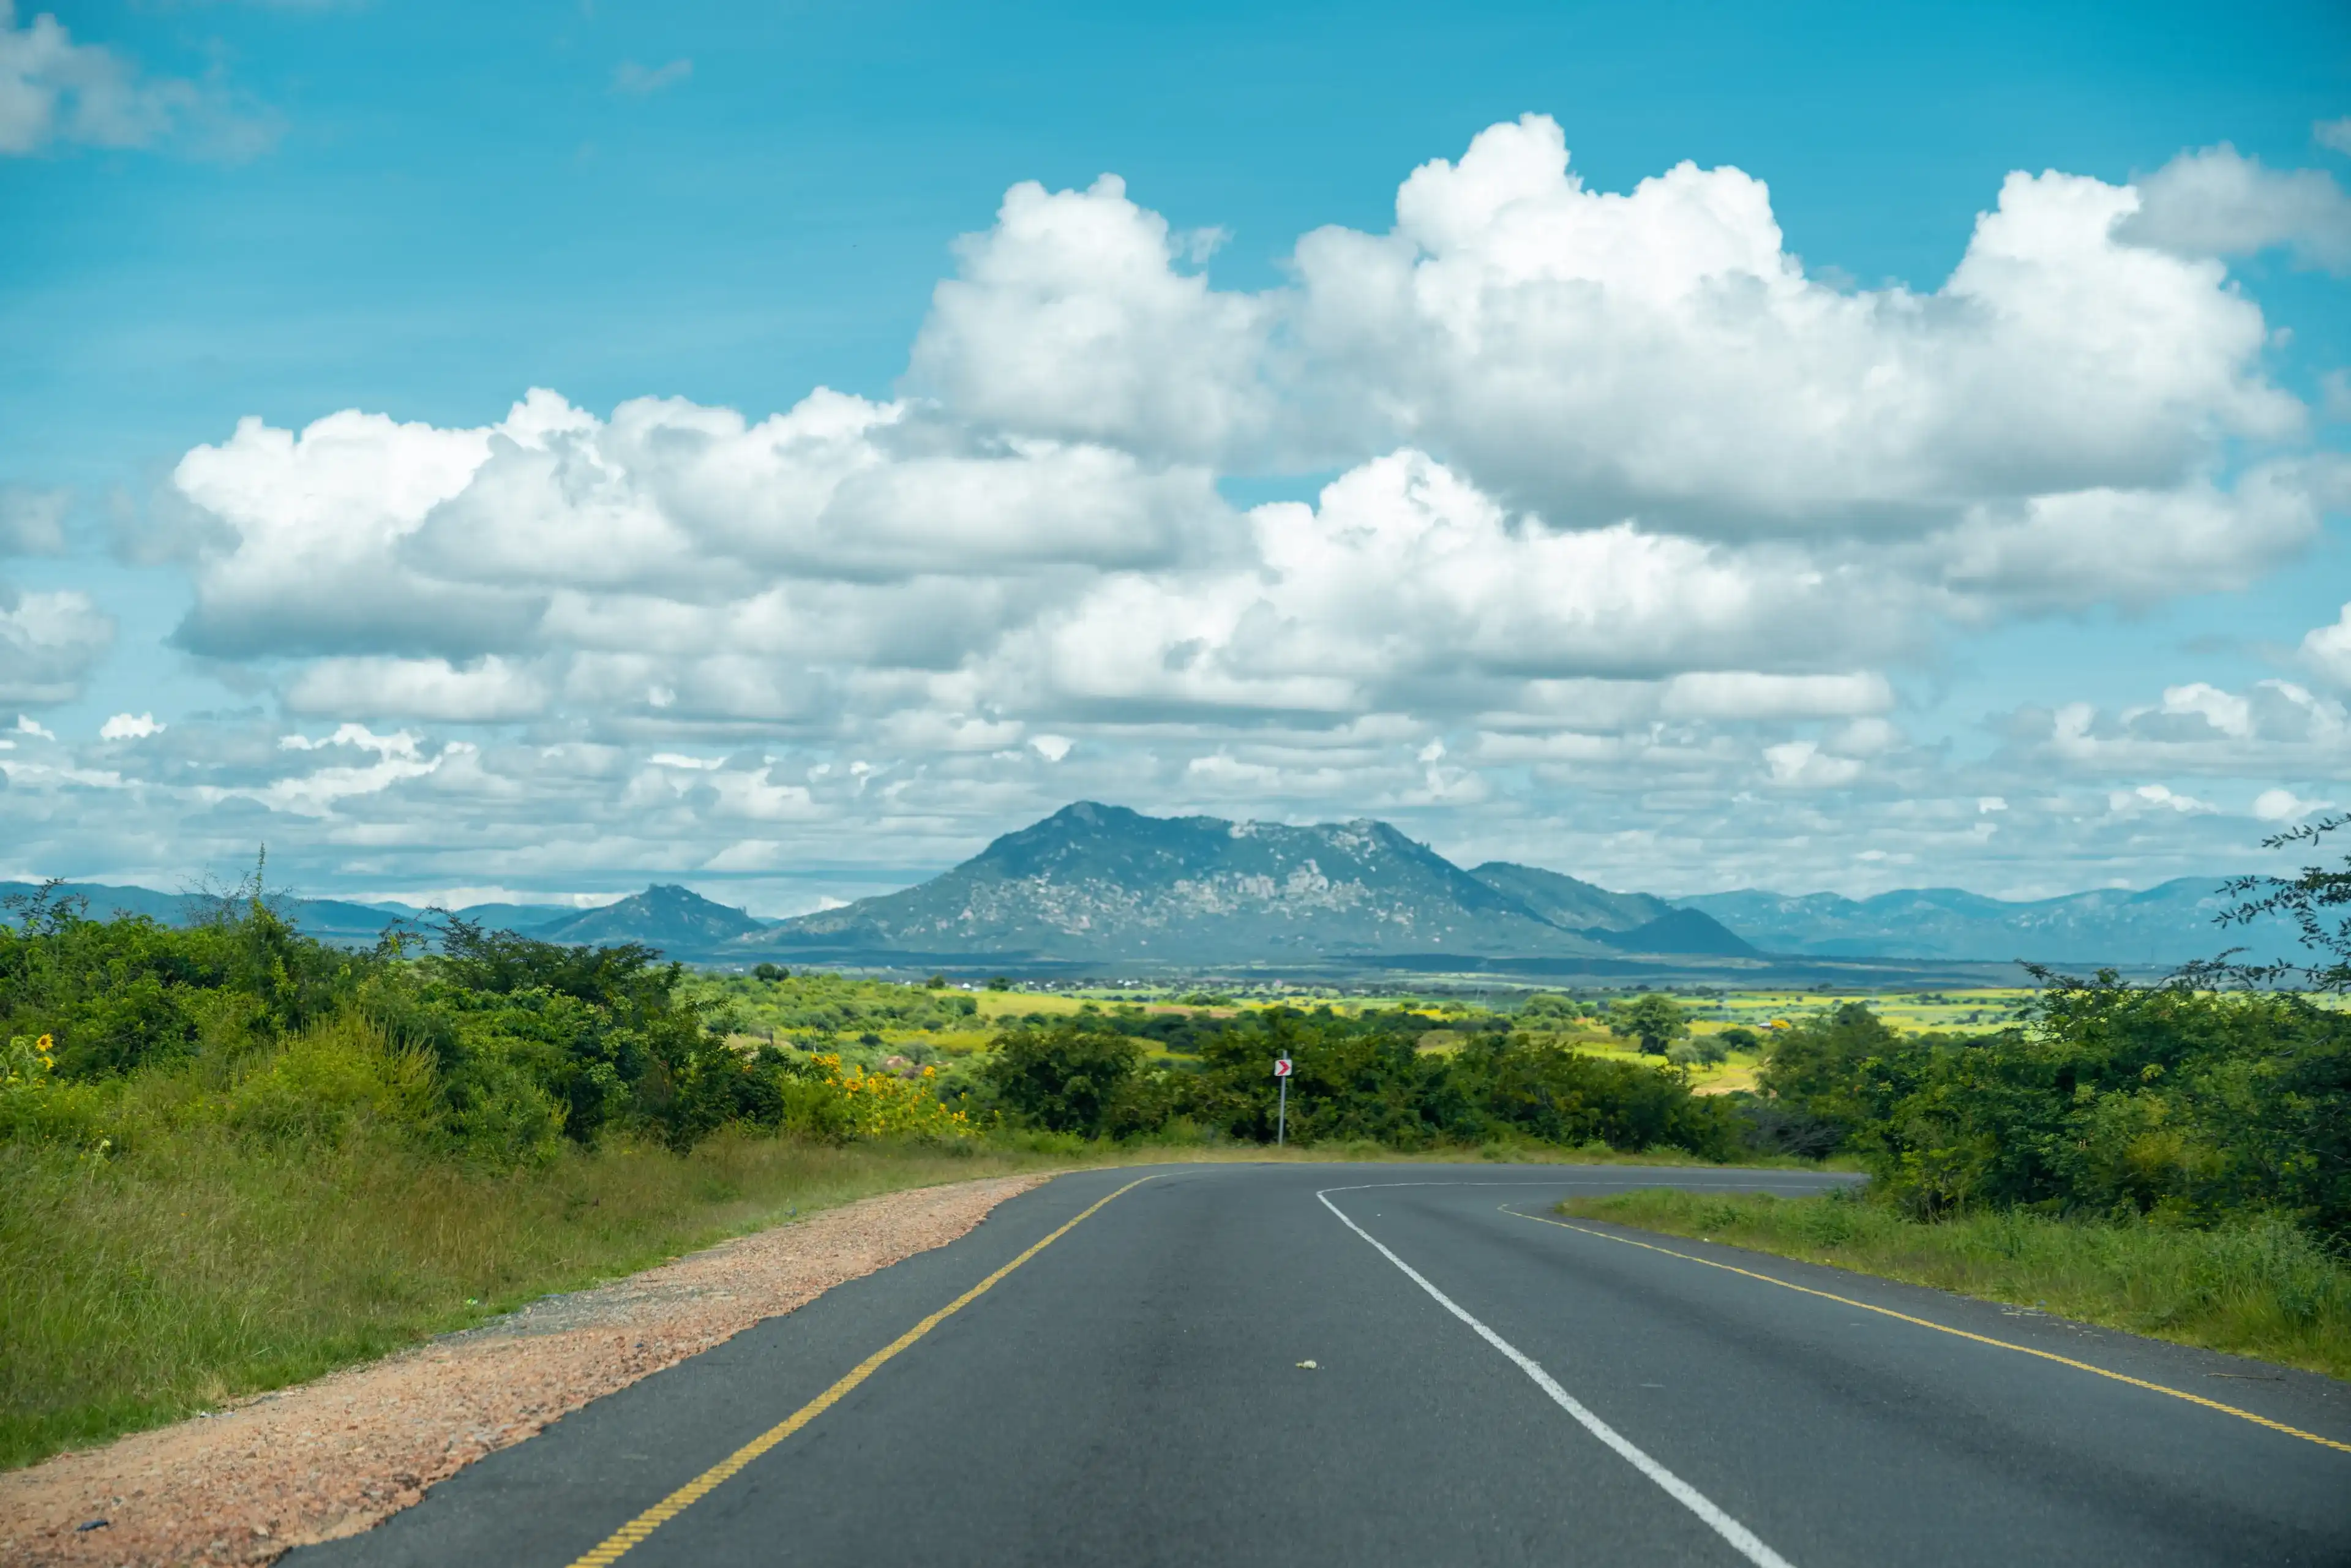 The road view landscape between Dodoma and Iringa town in Tanzania